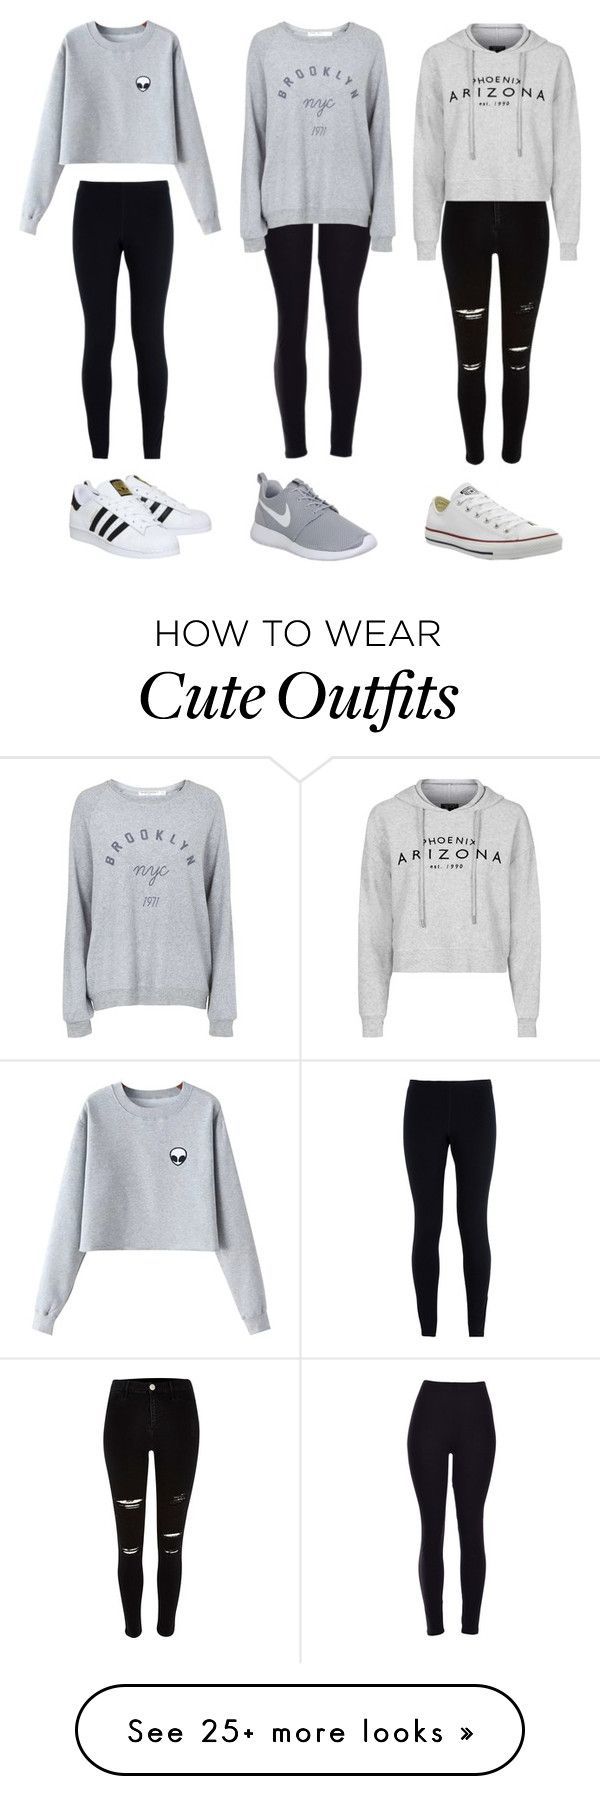 “3 cute outfits” by olivia-fashionhomebeauty on Polyvore featuring moda,